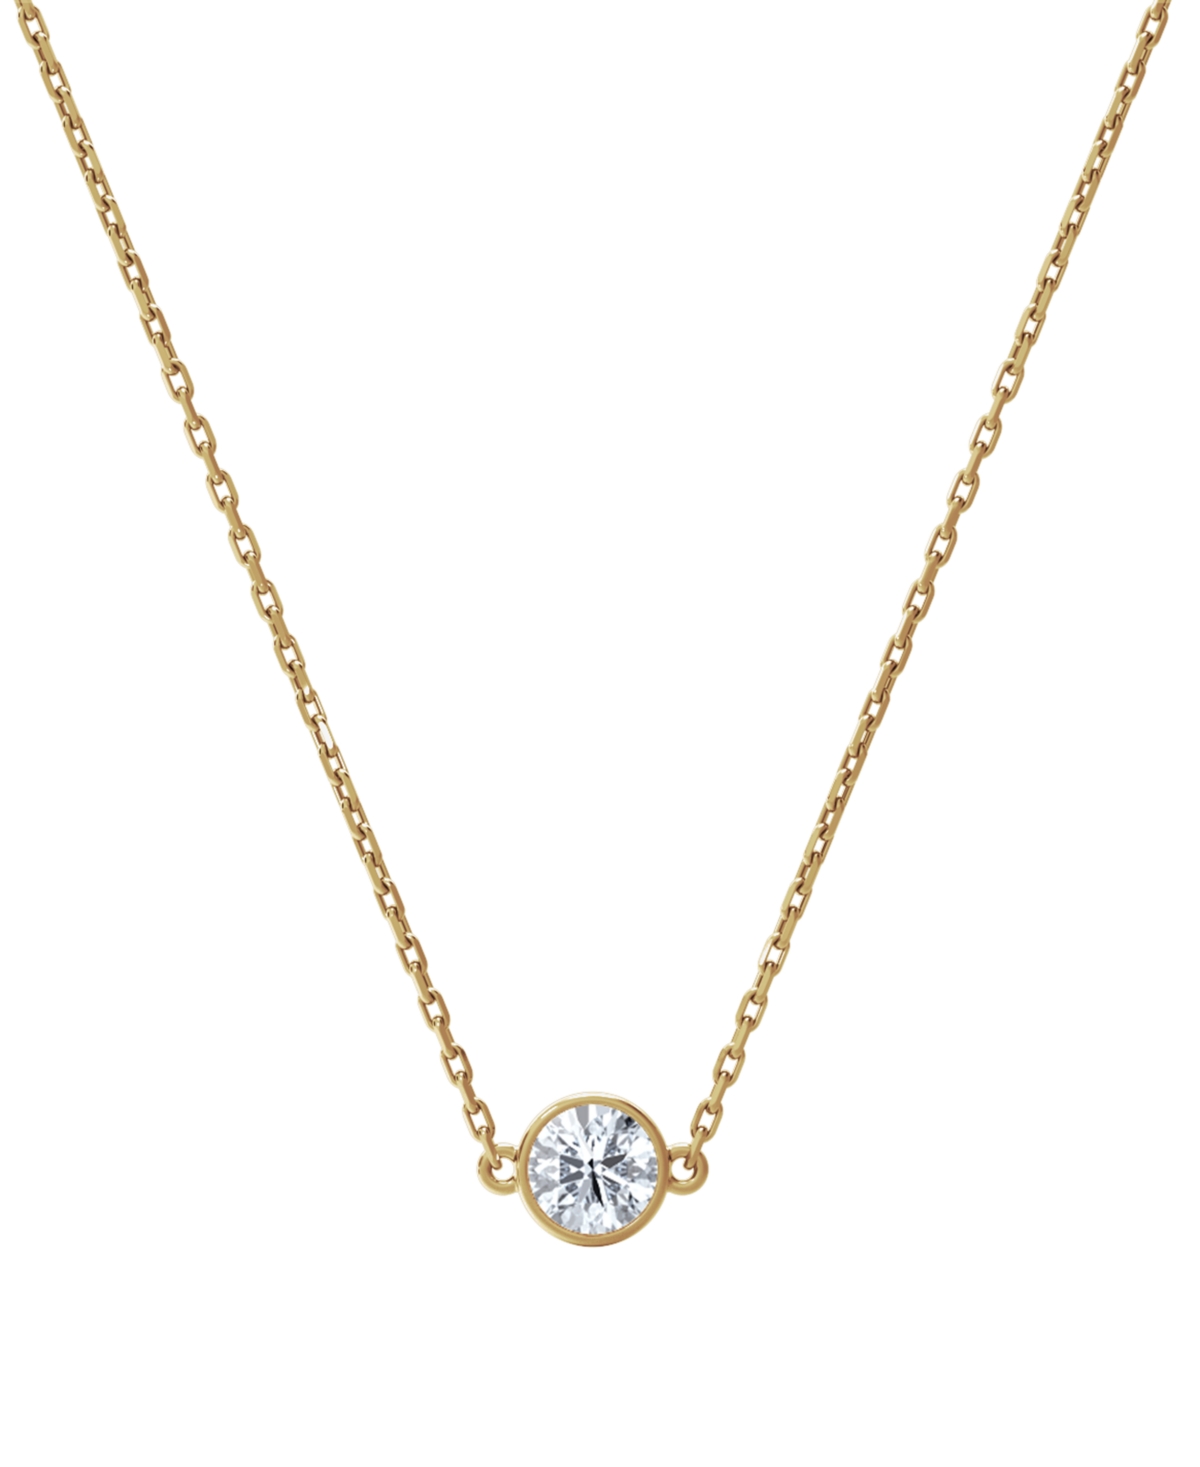 De Beers Forevermark Portfolio by De Beers Forevermark Diamond Bezel Pendant Necklace (1/10 ct. t.w.) in 14k White or Yellow Gold, 16" + 2" extender